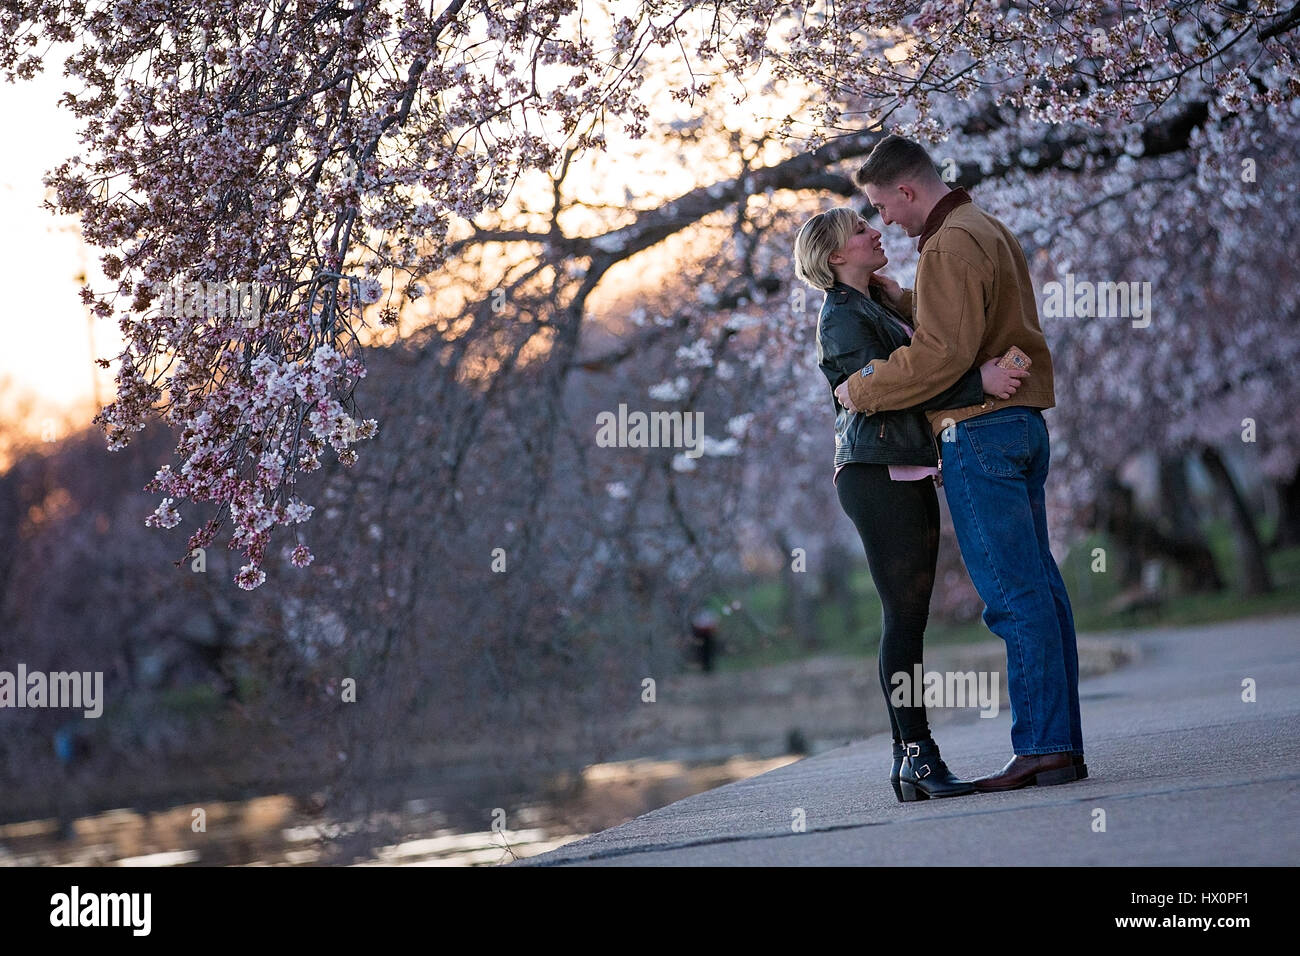 A couple embraces under the Cherry Blossom trees that line the Tidal Basin on the National Mall in Washington, D.C. March 22, 2017. Stock Photo